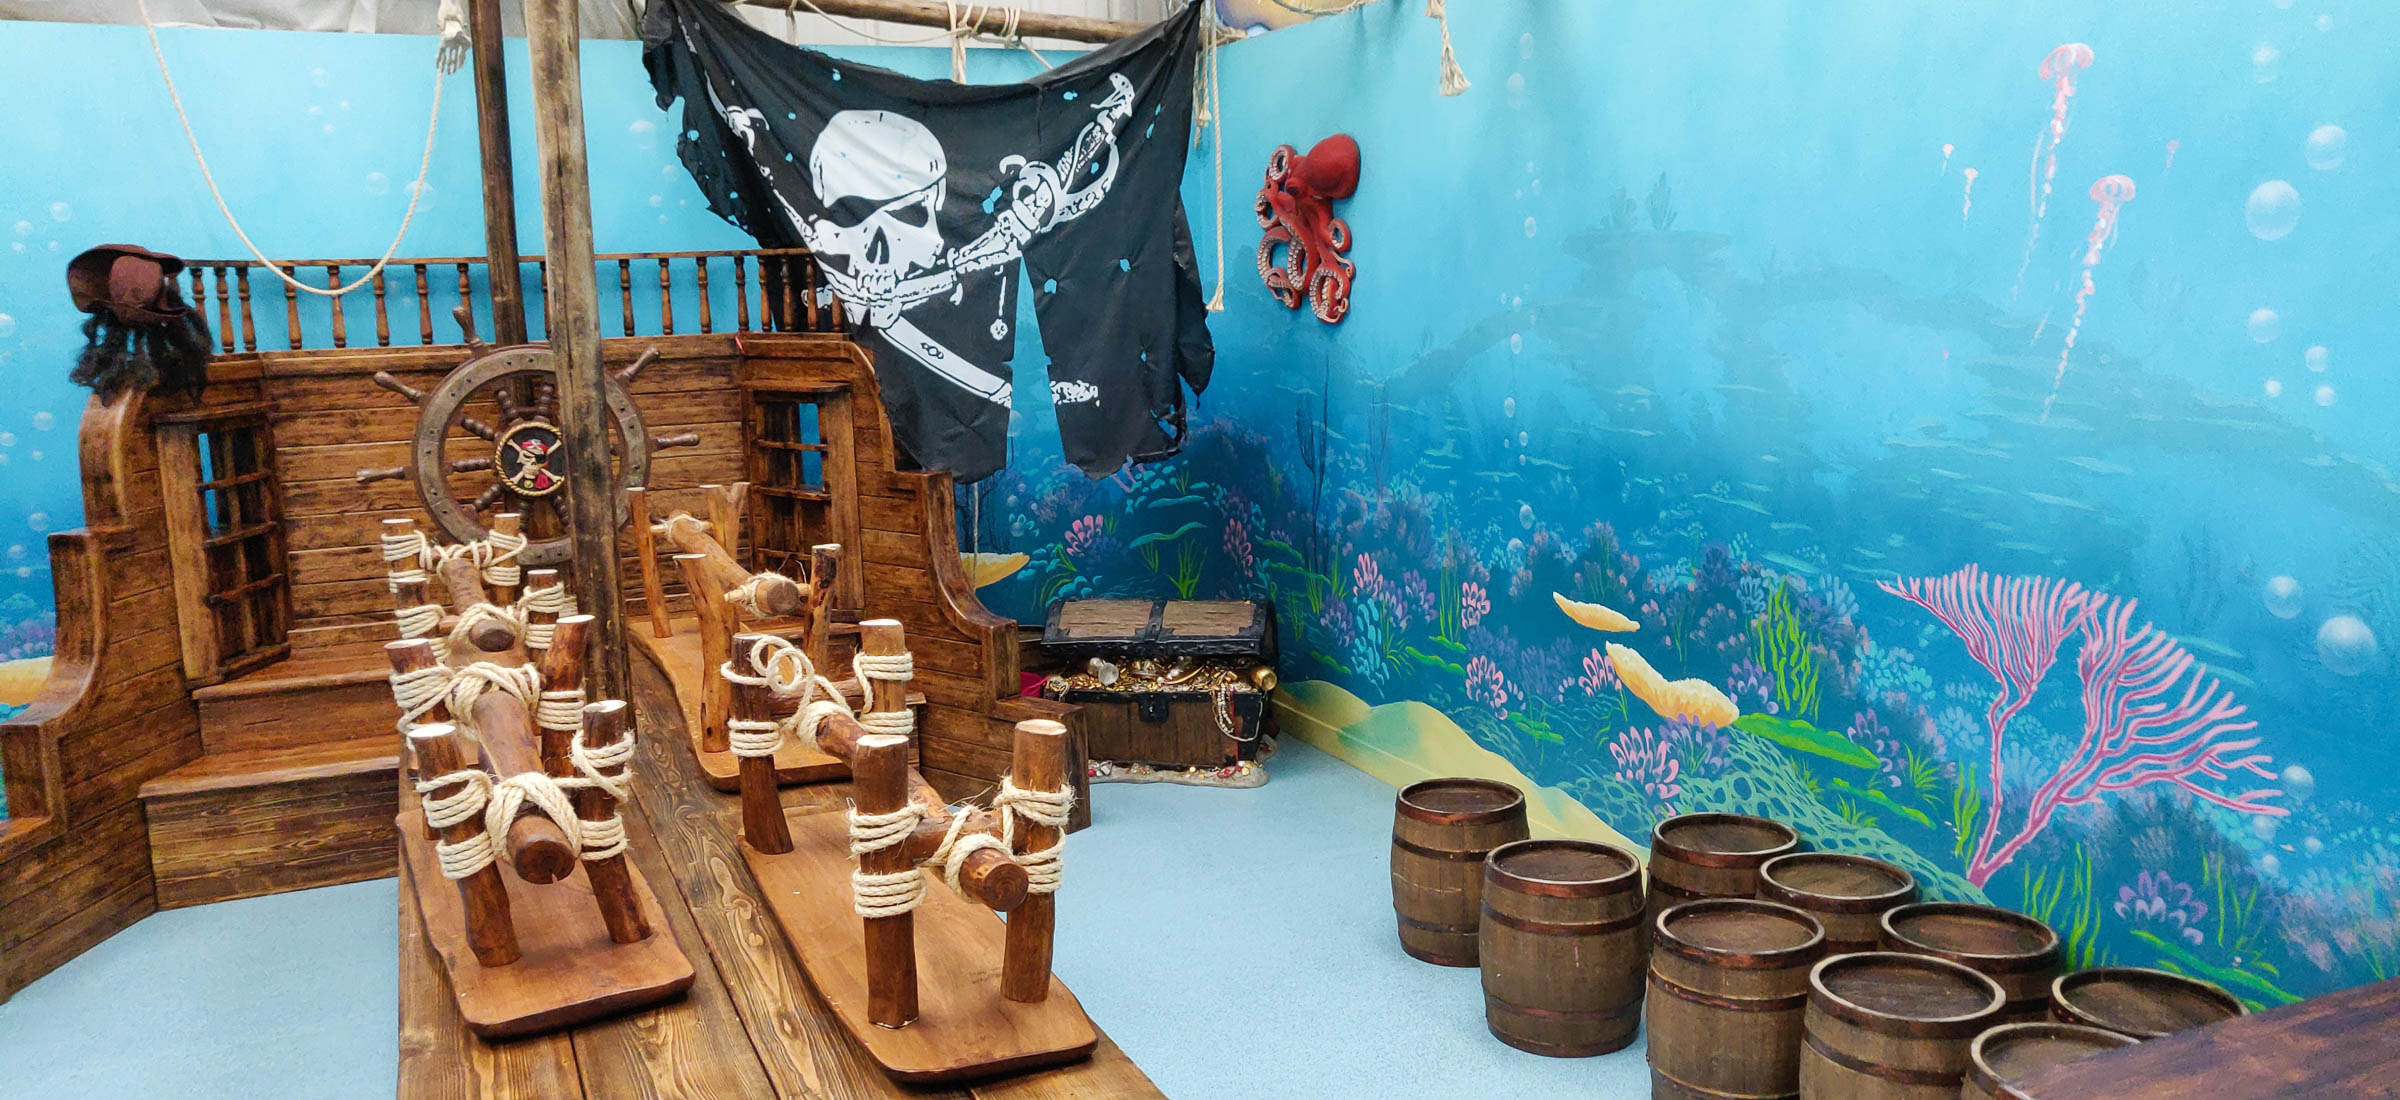 Pirate flag and treasure chest finish off the muralled space brilliantly